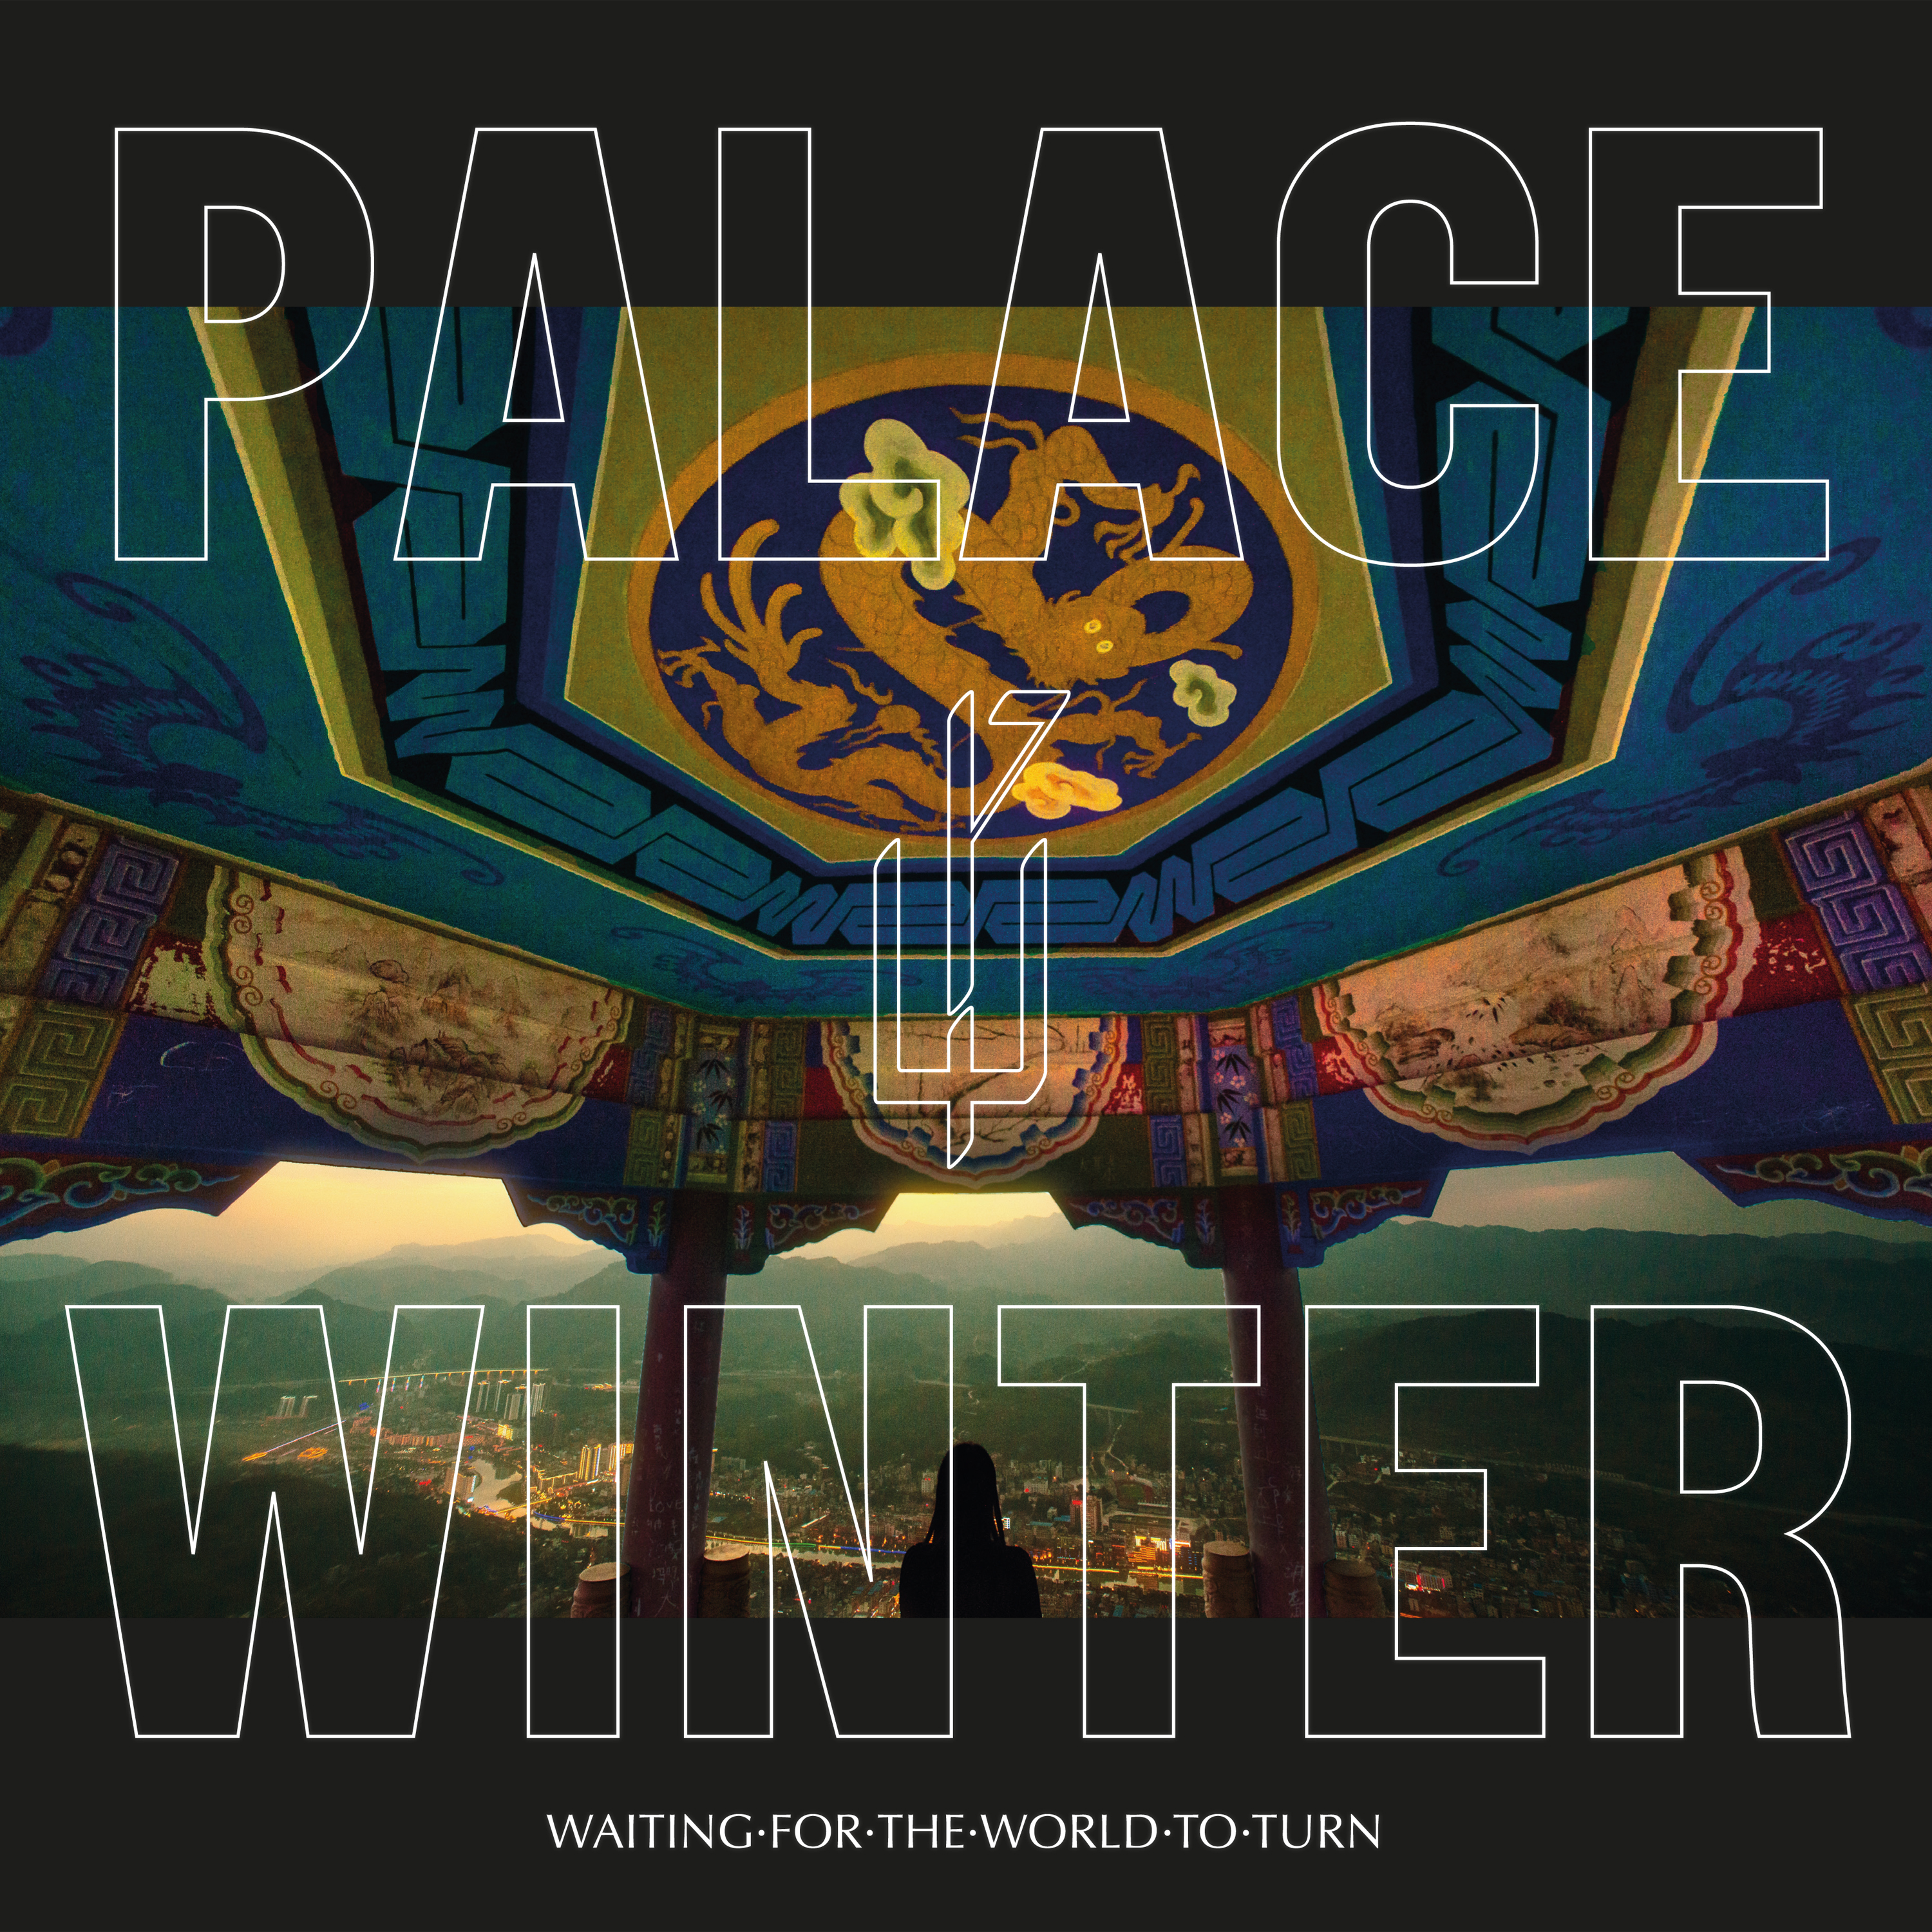 Palace Winter - Waiting for the World to Turn